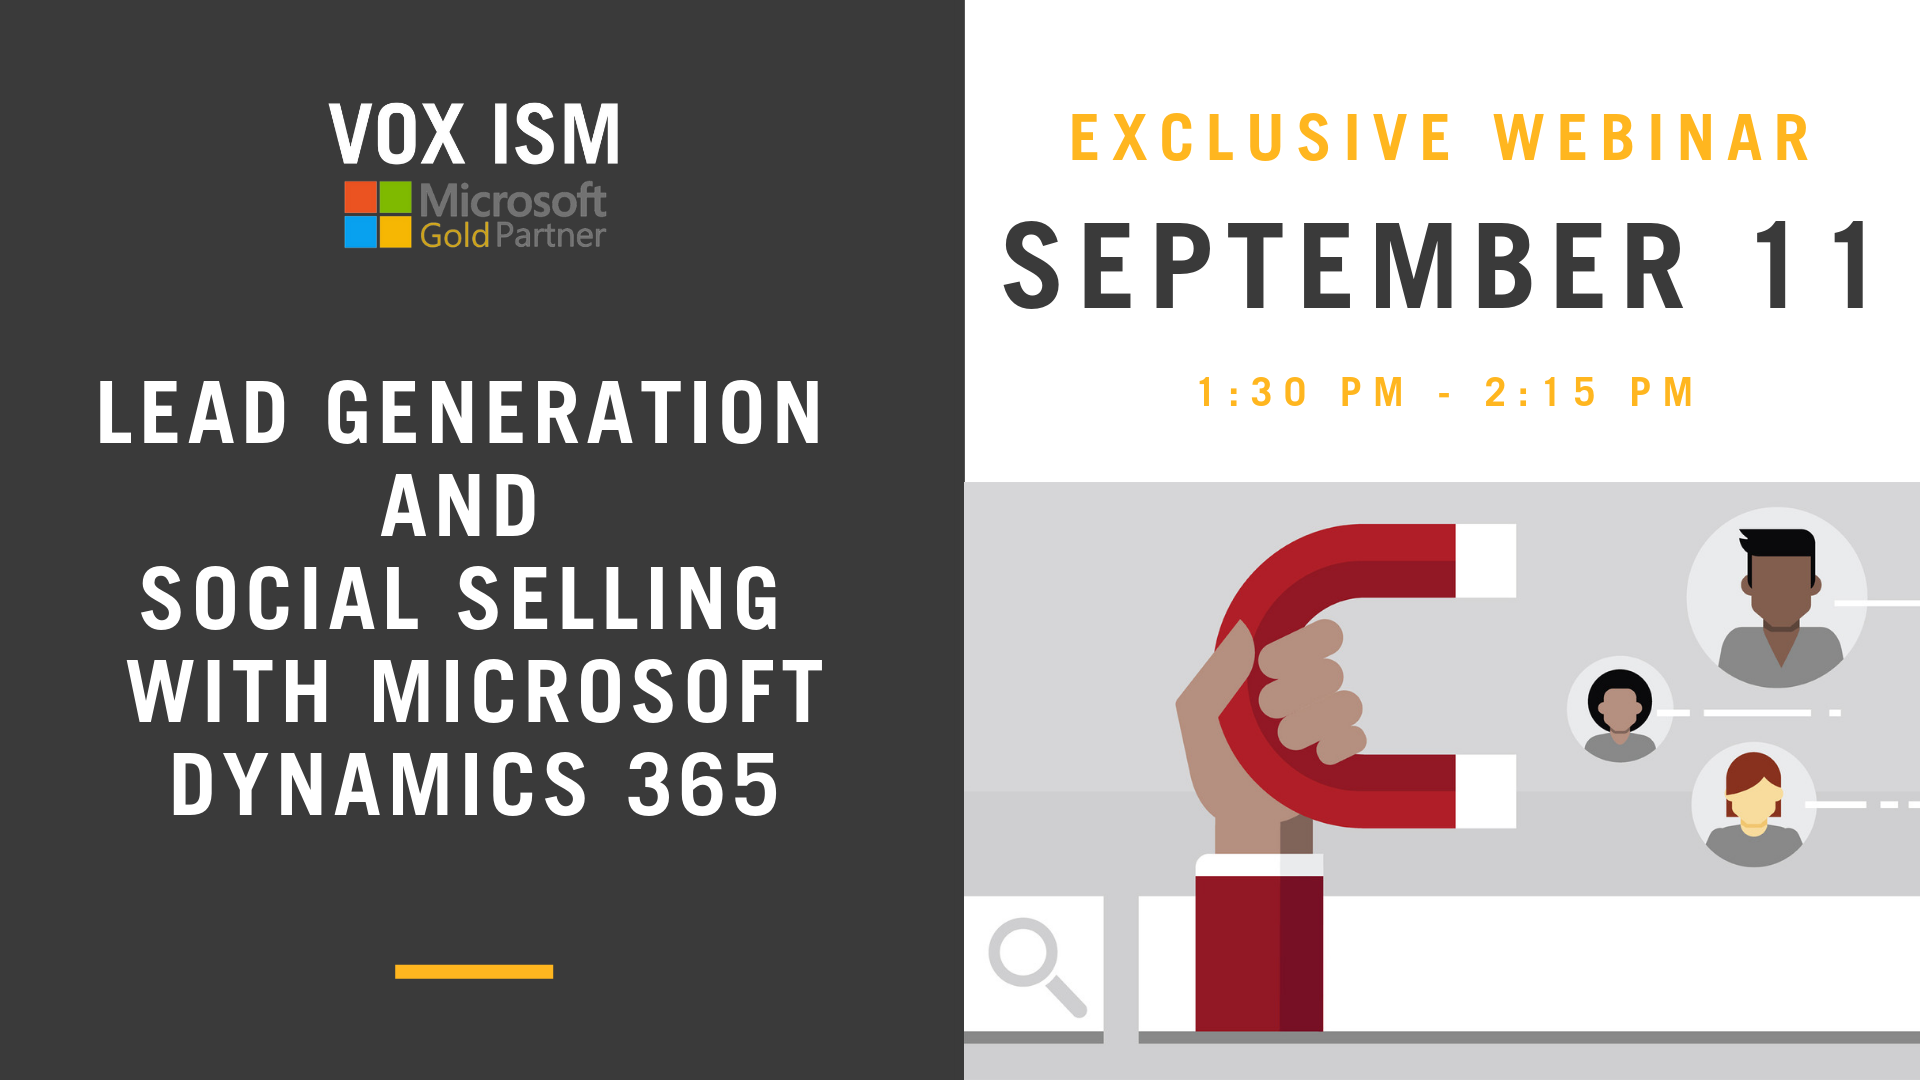 Lead Generation and Social Selling With Microsoft Dynamics 365 - September 11 - Webinar - VOX ISM